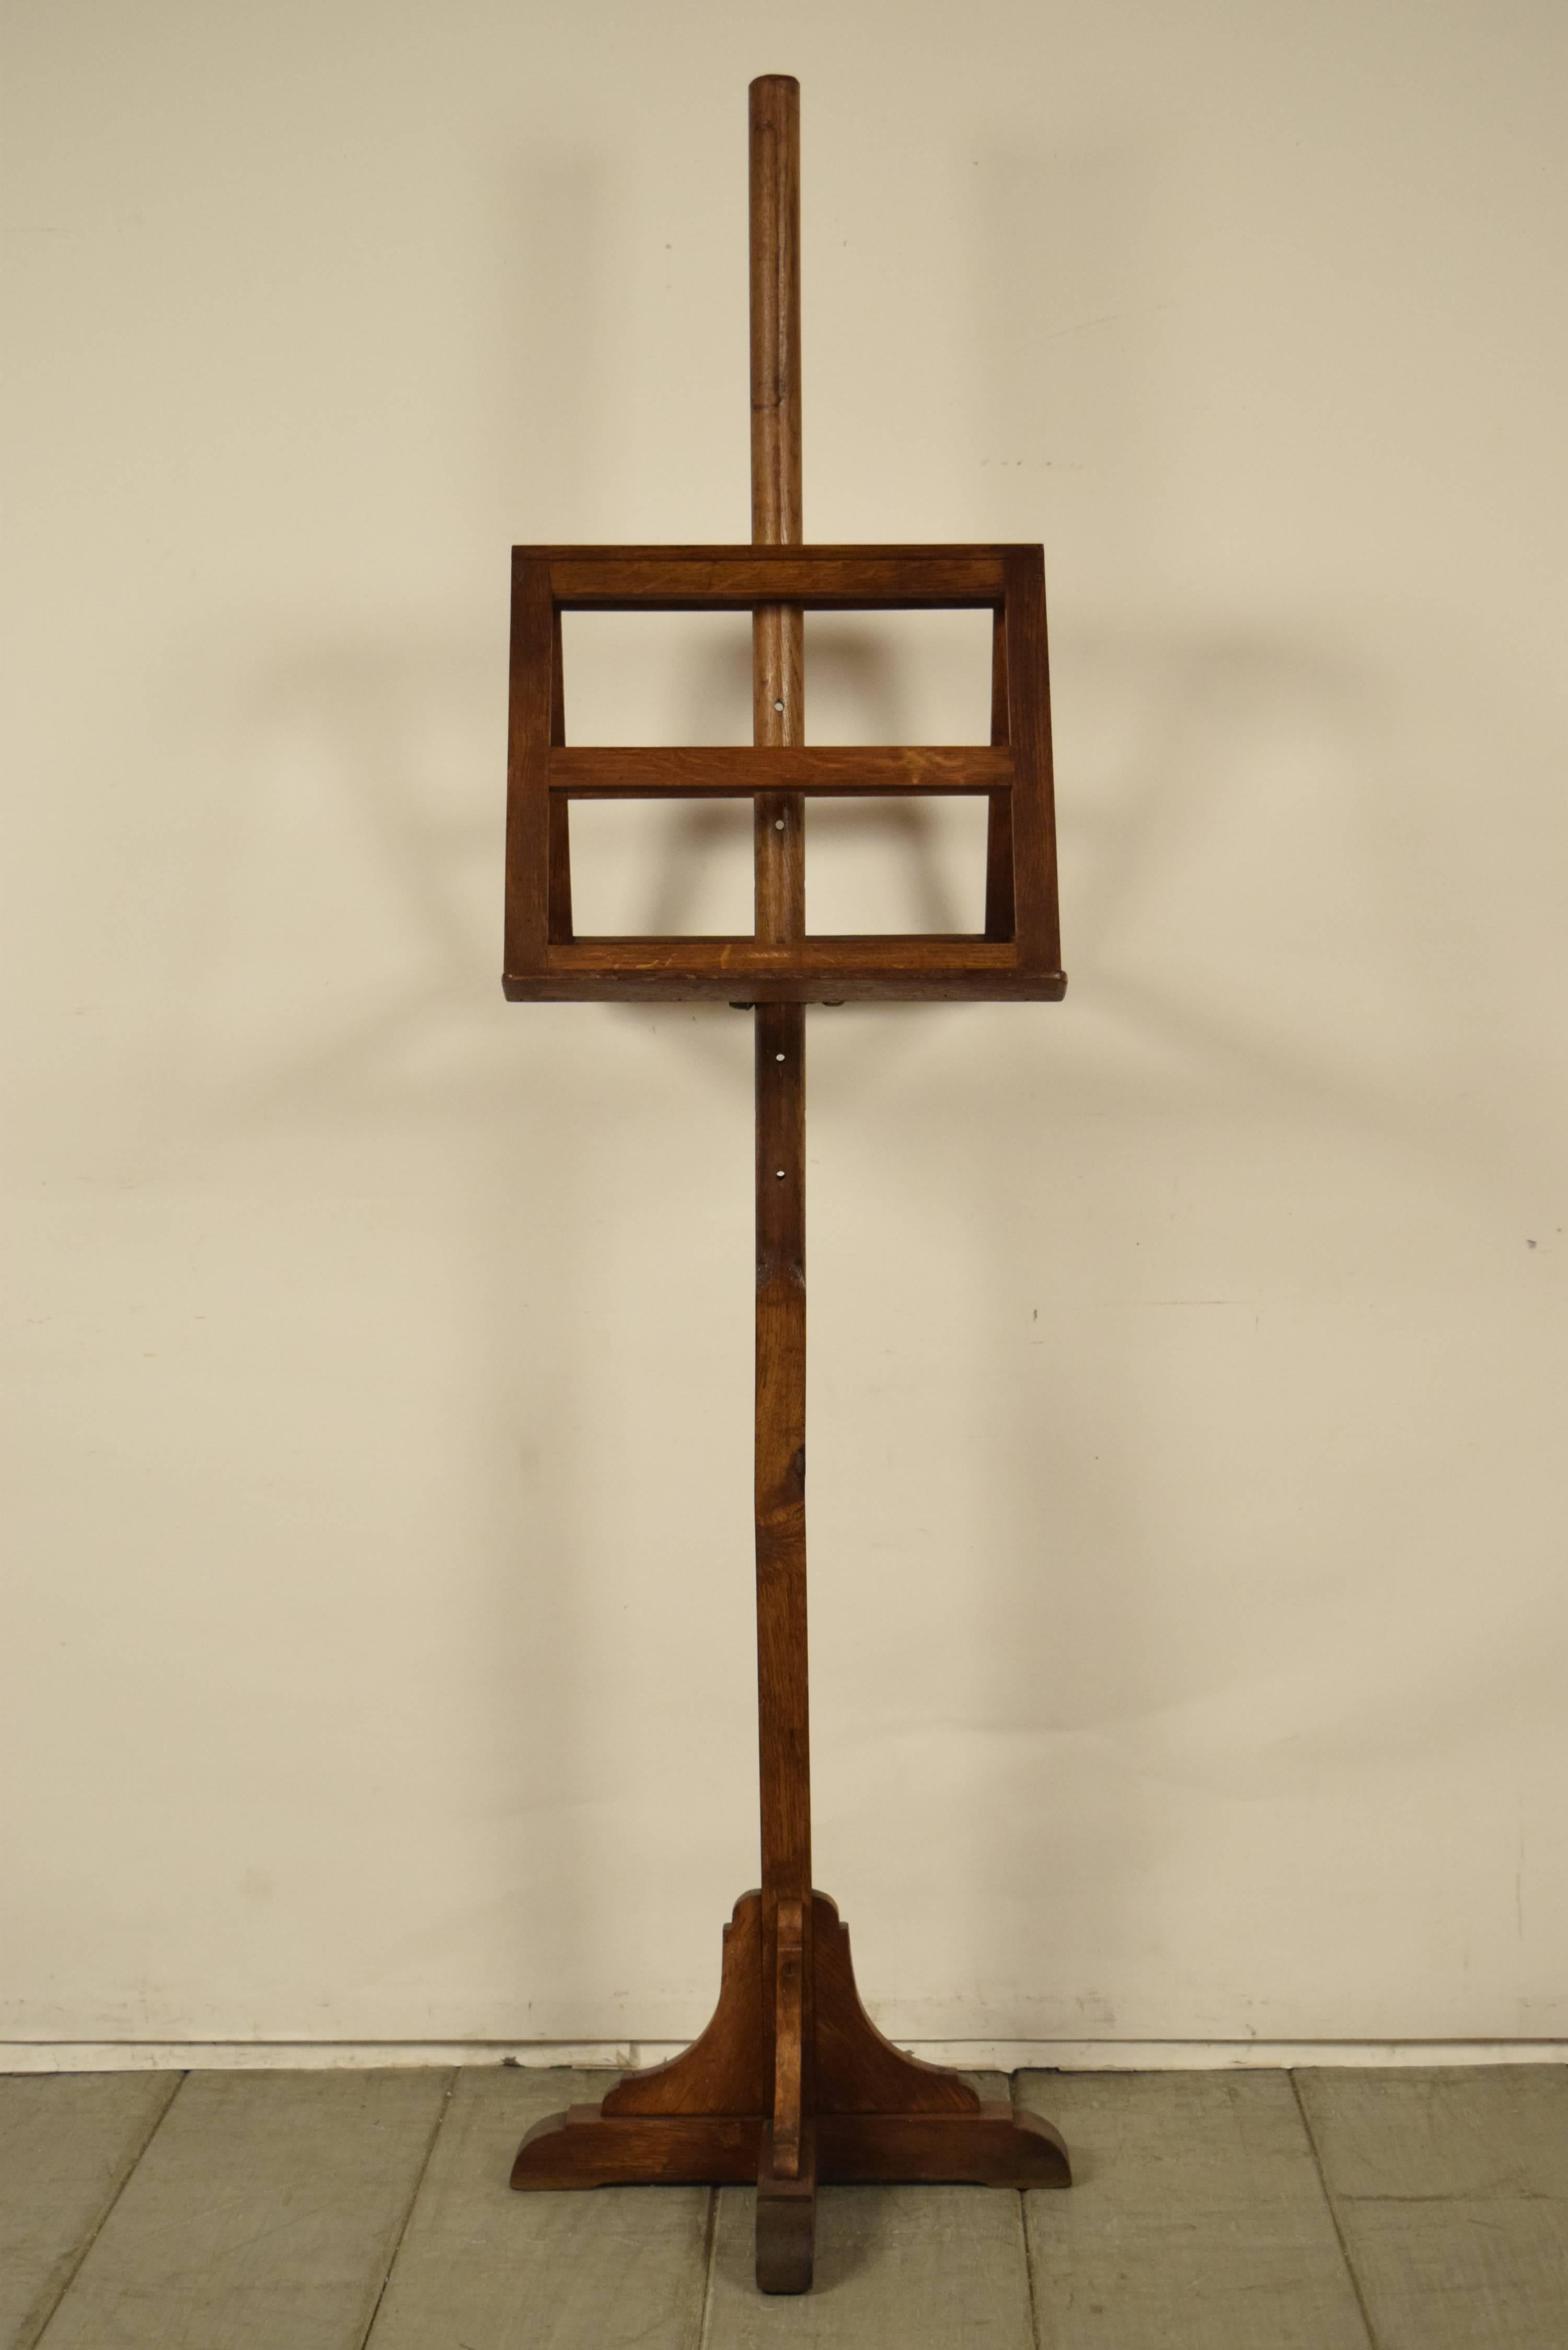 One of a kind French antique solid oakwood duet music stand. The top is double sided, and the height can be adjusted as you please. It has multiple uses for displaying items. It is made of solid oakwood with a walnut finish, and is supported by a